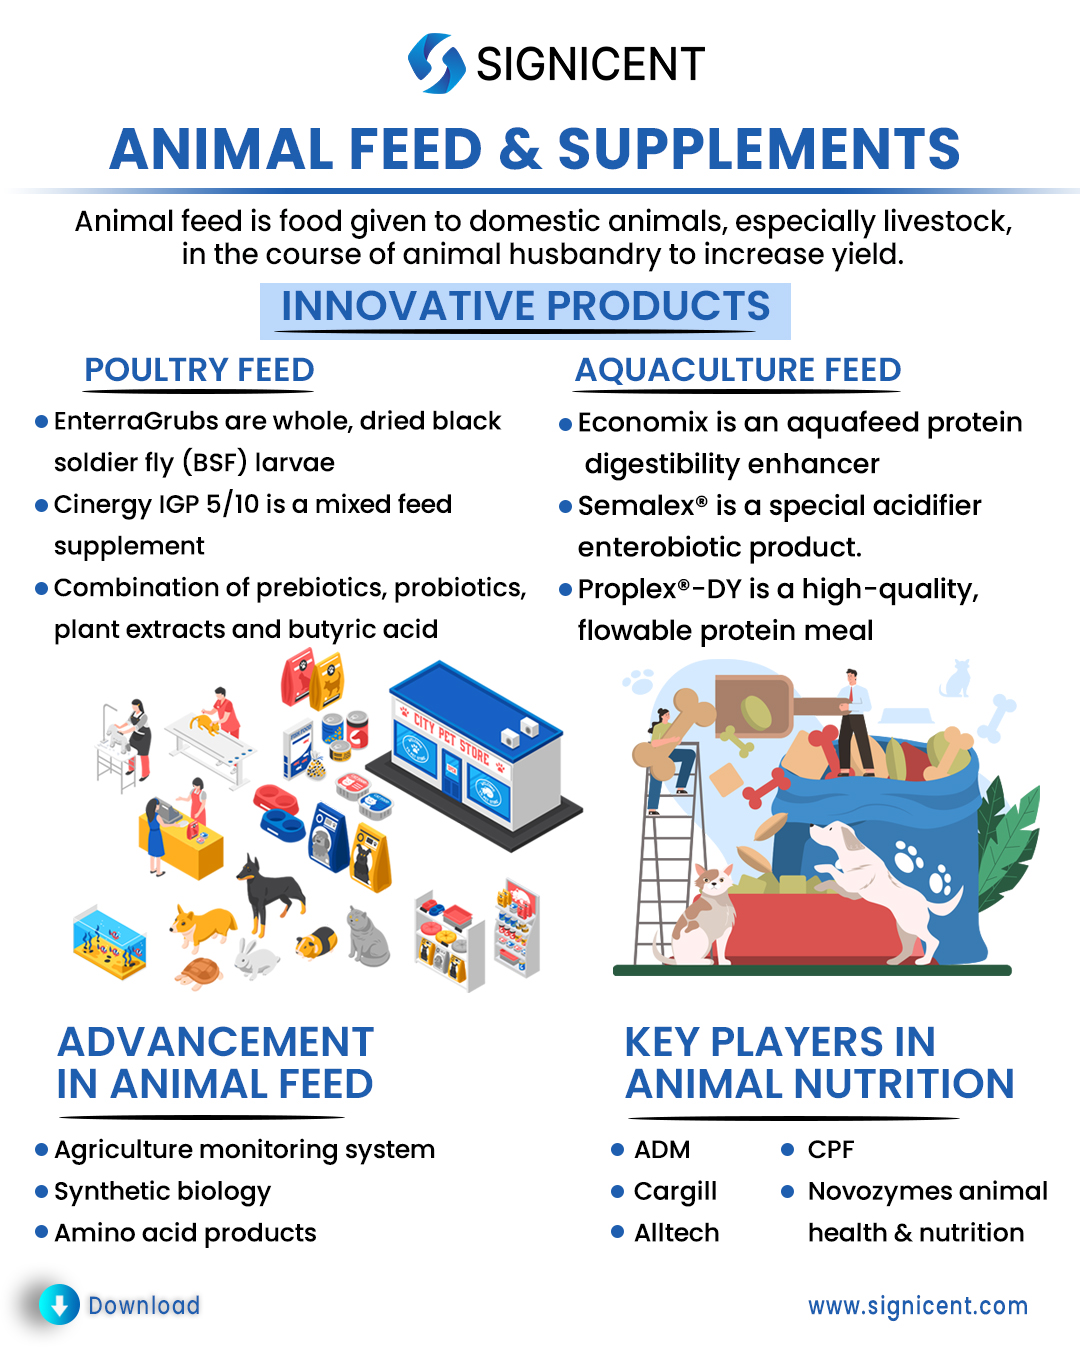 Animal Feed & Supplements Report: Innovations Driving Poultry, Aquaculture  & Pet Food Market - Signicent LLP